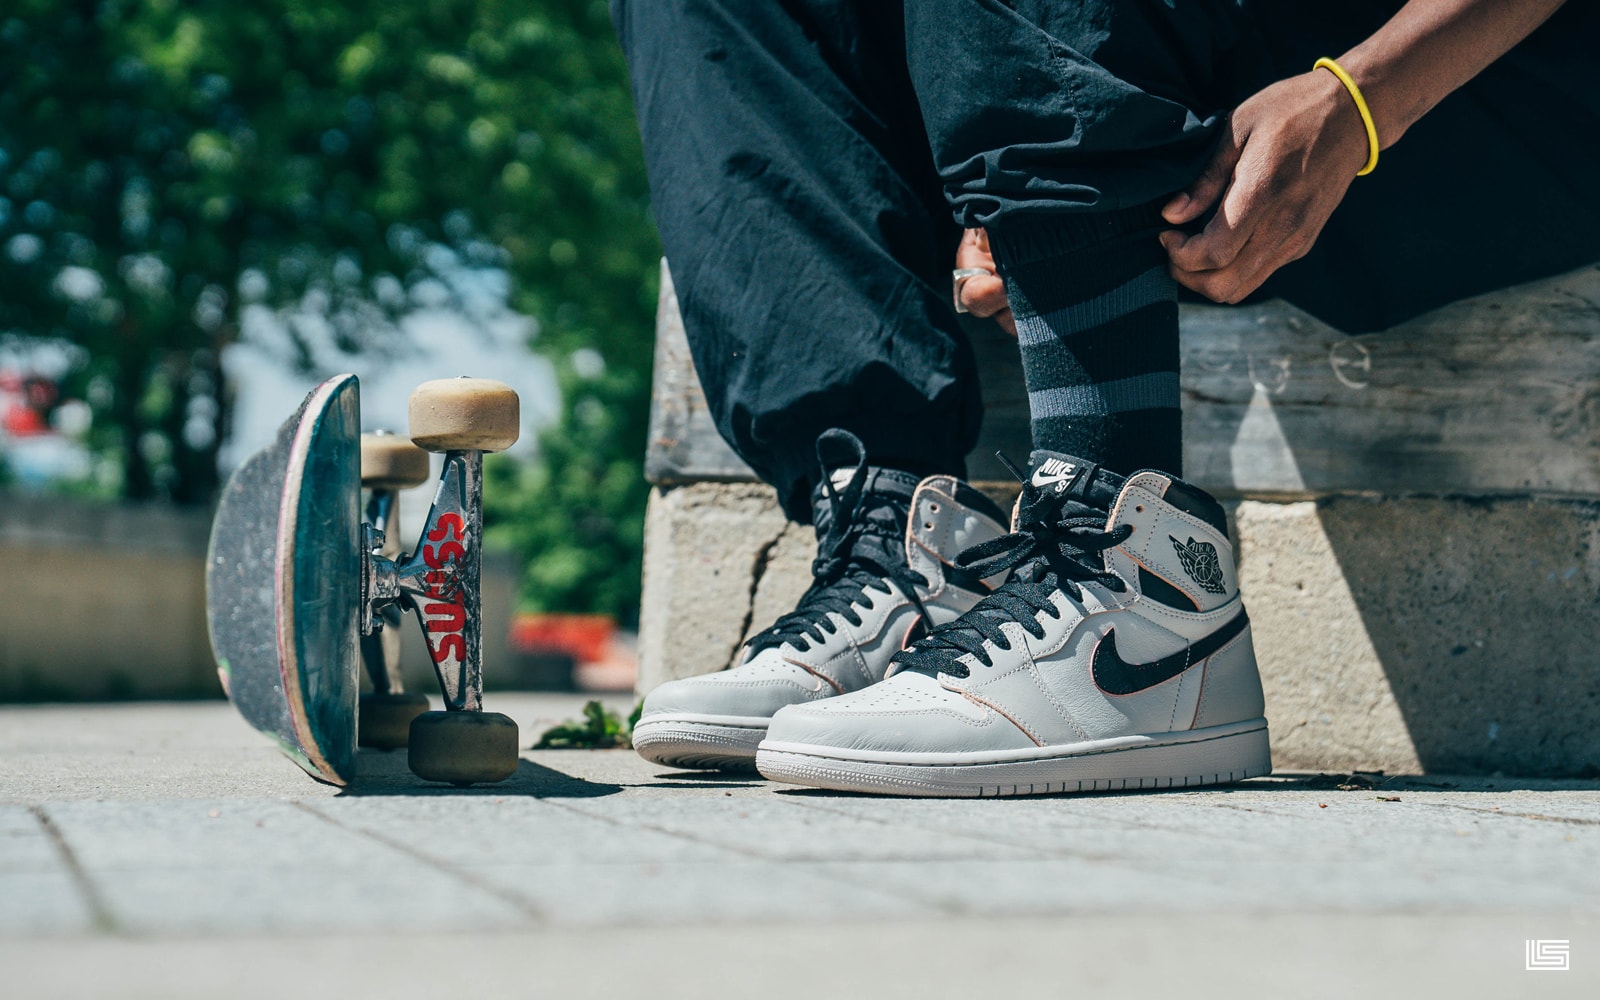 UNBOXED EPISODE 57: Wear Testing the SB x Air Jordan 1 'NYC to ...